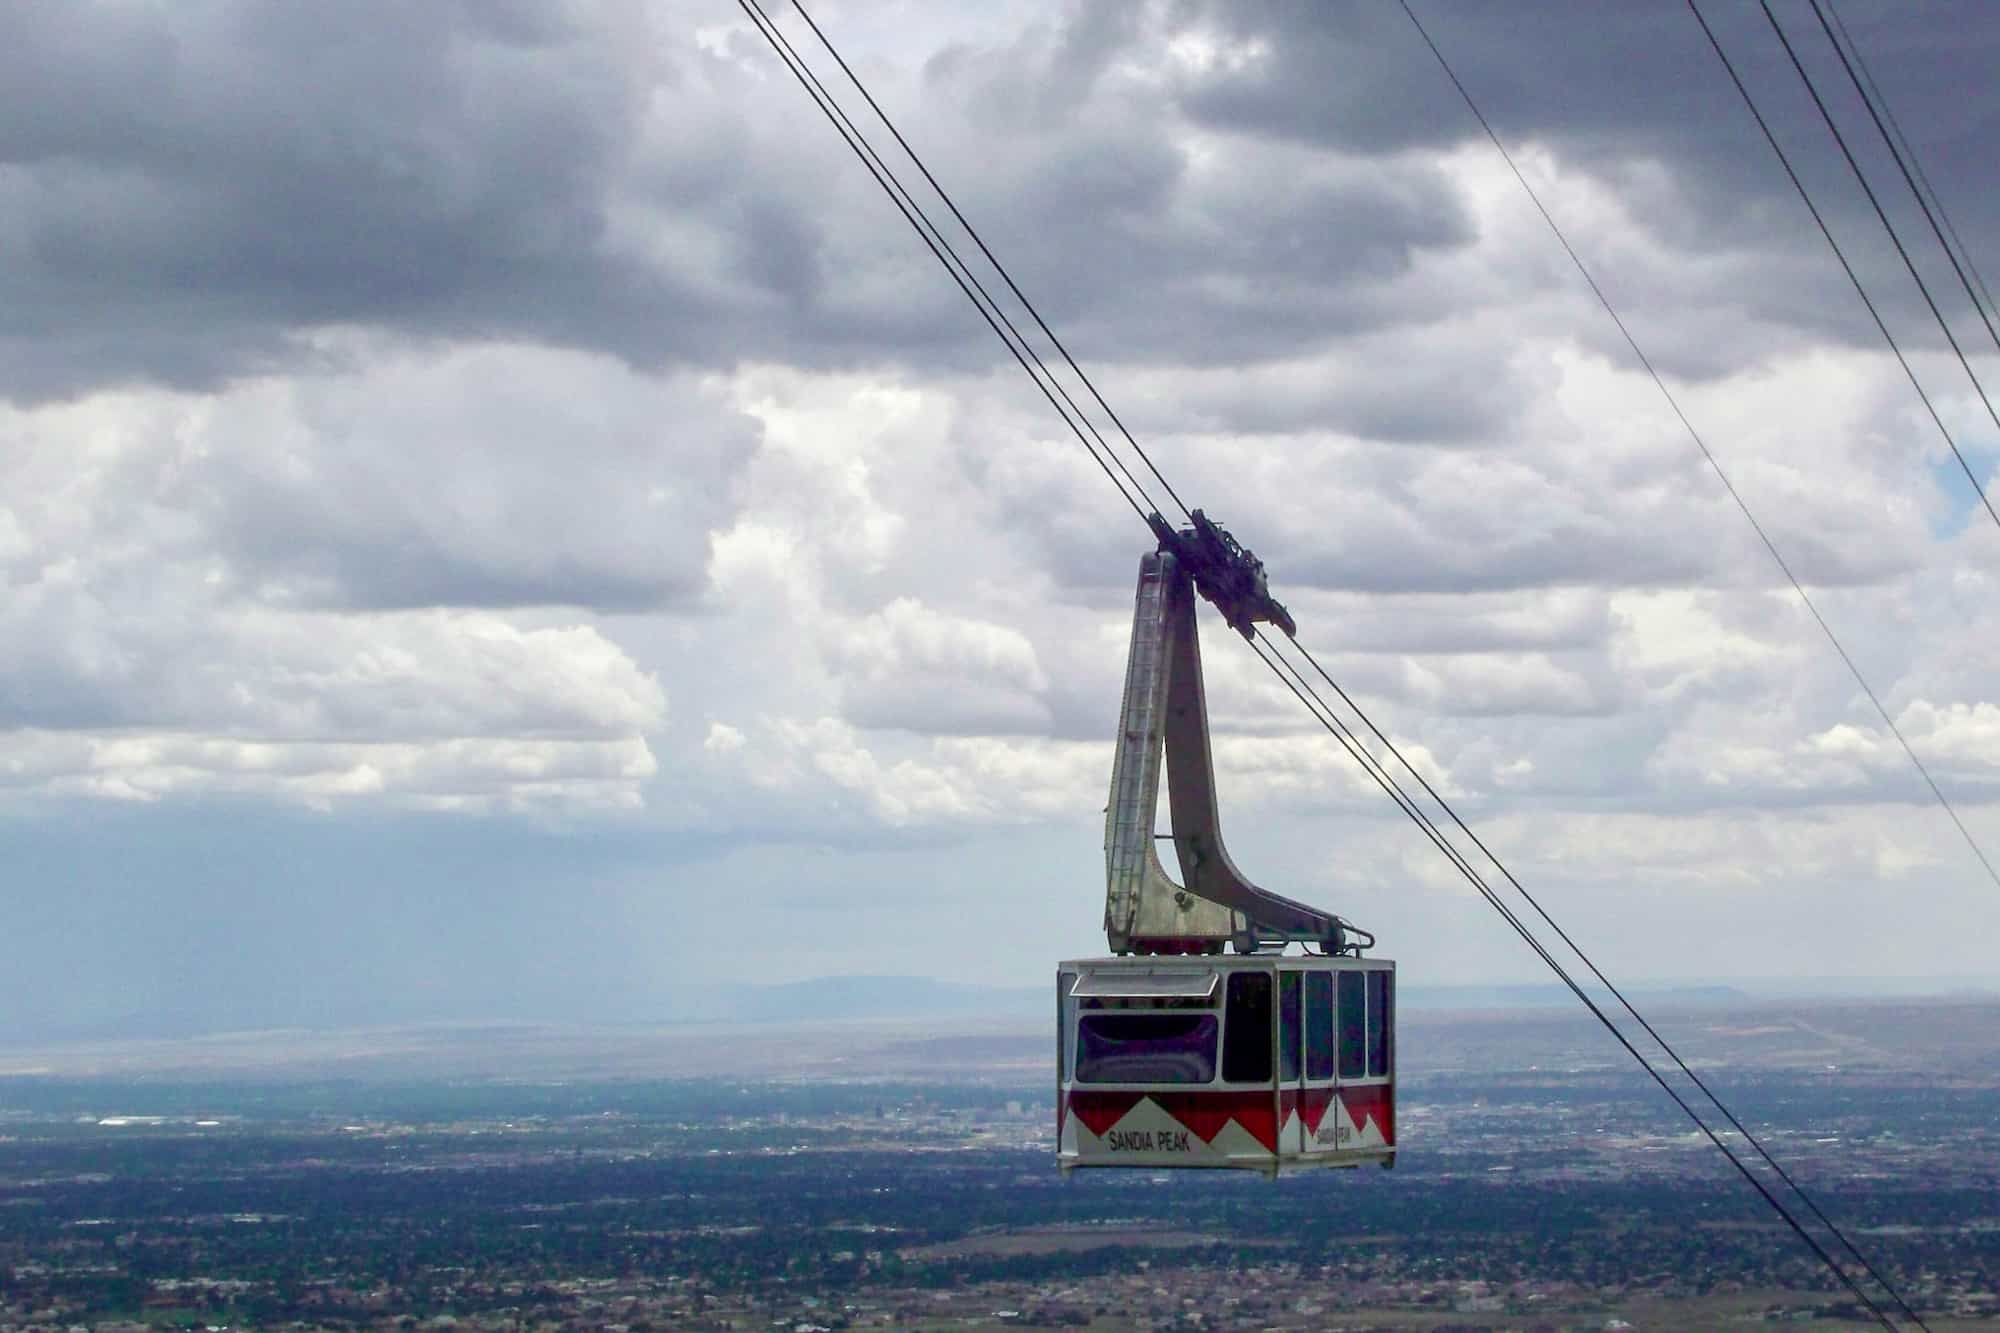 on a road trip from houston to grand canyon, the sandia peak tramway is a great stop to see views of albuqueque, the tram car is seen here